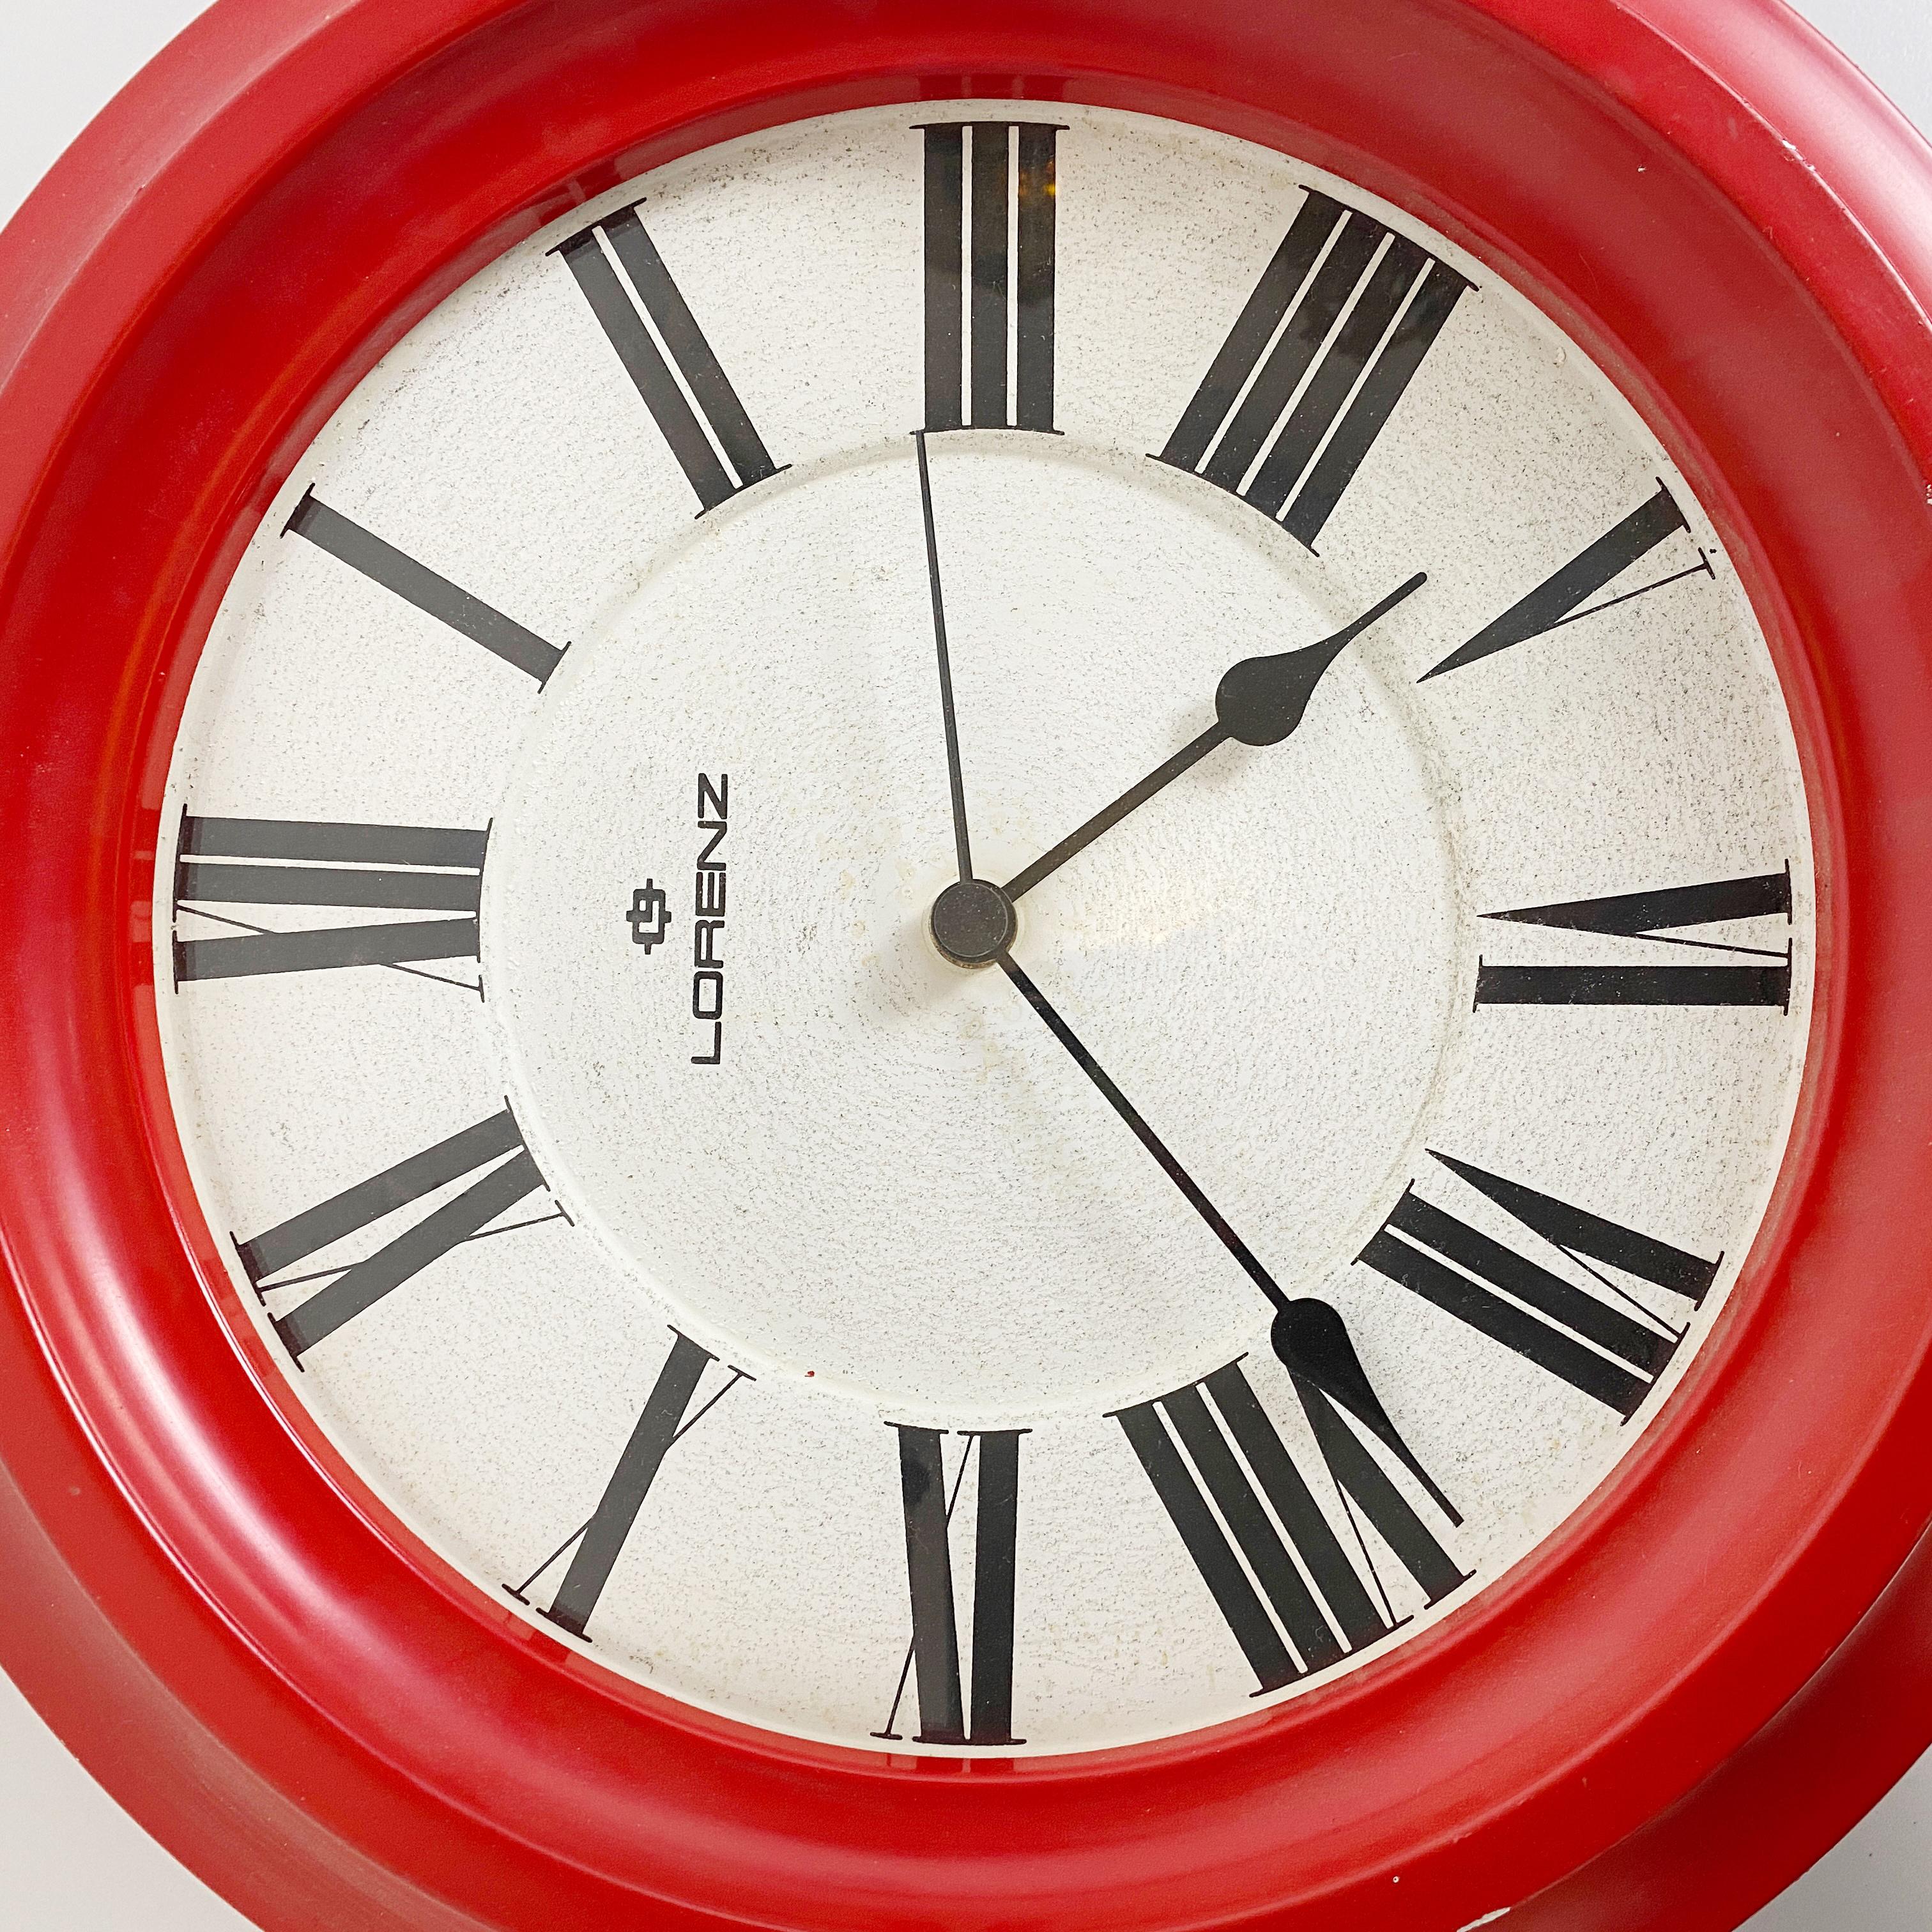 Italian Mid-Century Modern Round Red Wall Clock by Lorenz, 1970s For Sale 3